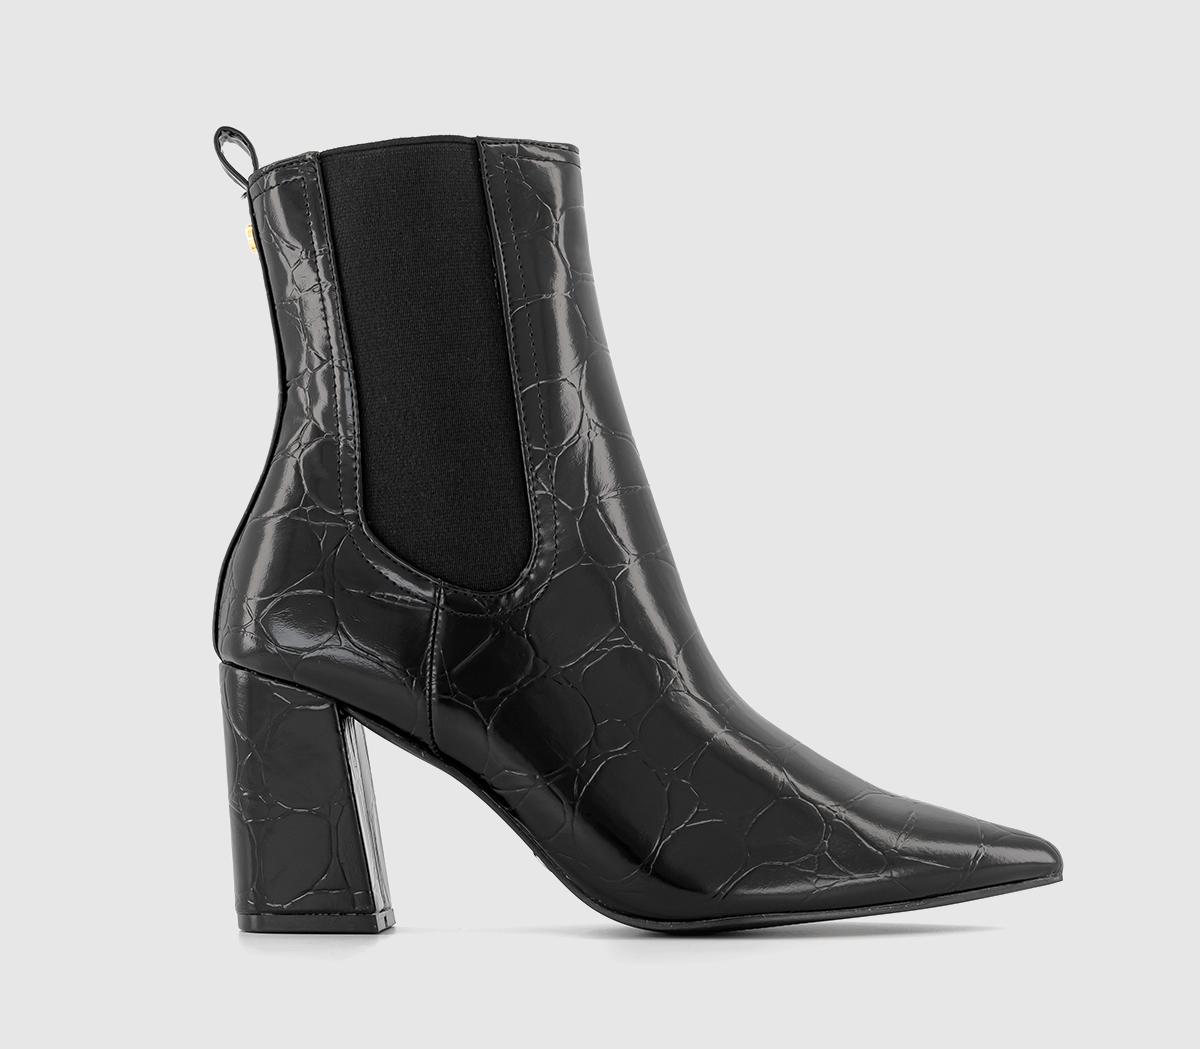 Advance Pointed Toe Chelsea Boots Black Patent Croc Embossed